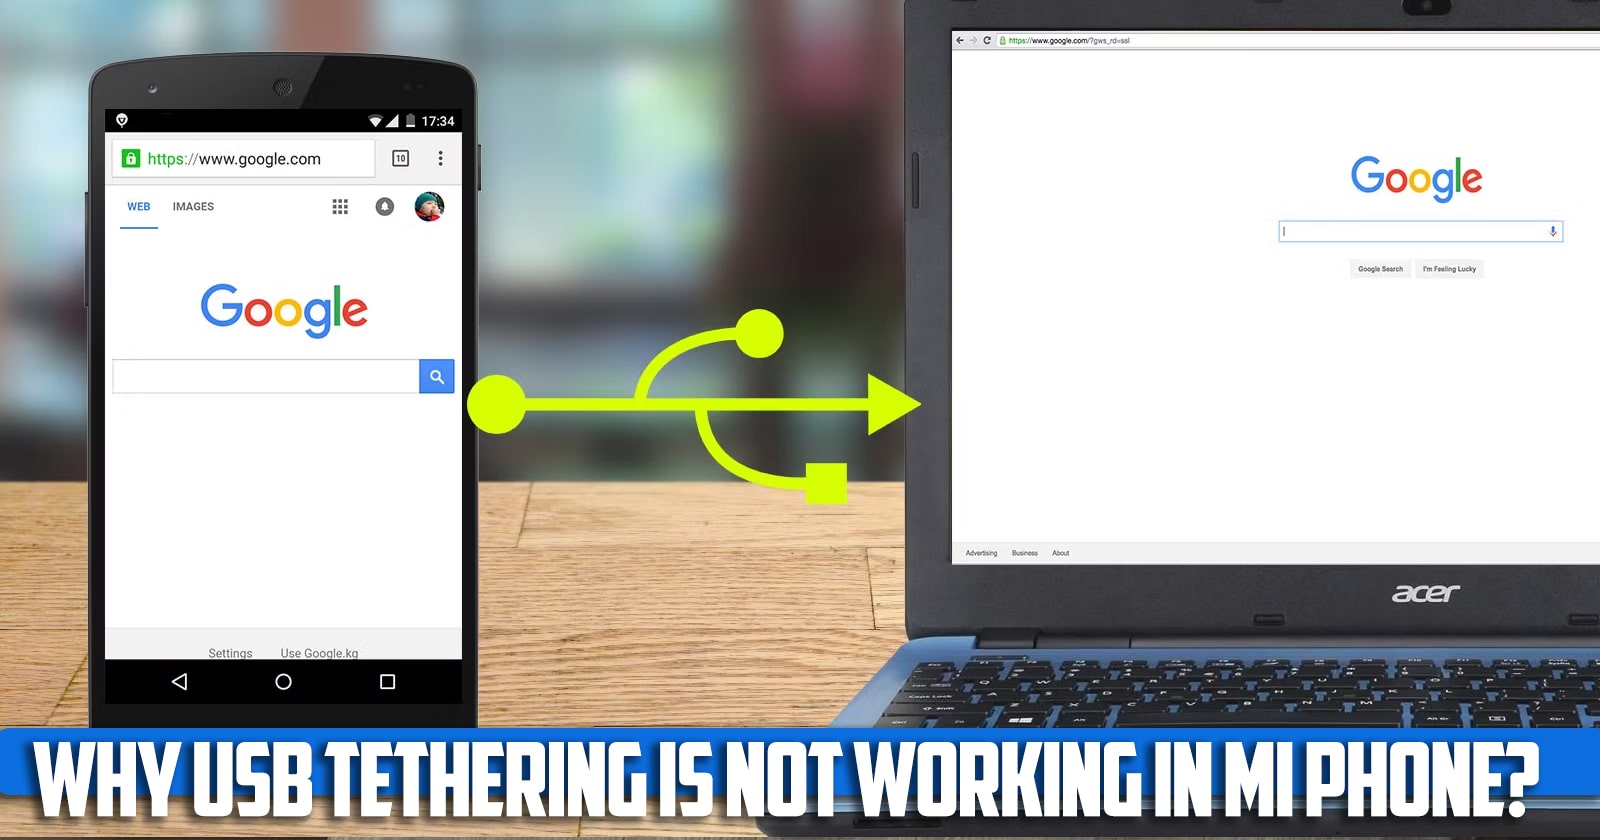 Why USB tethering is not working in Mi phone?